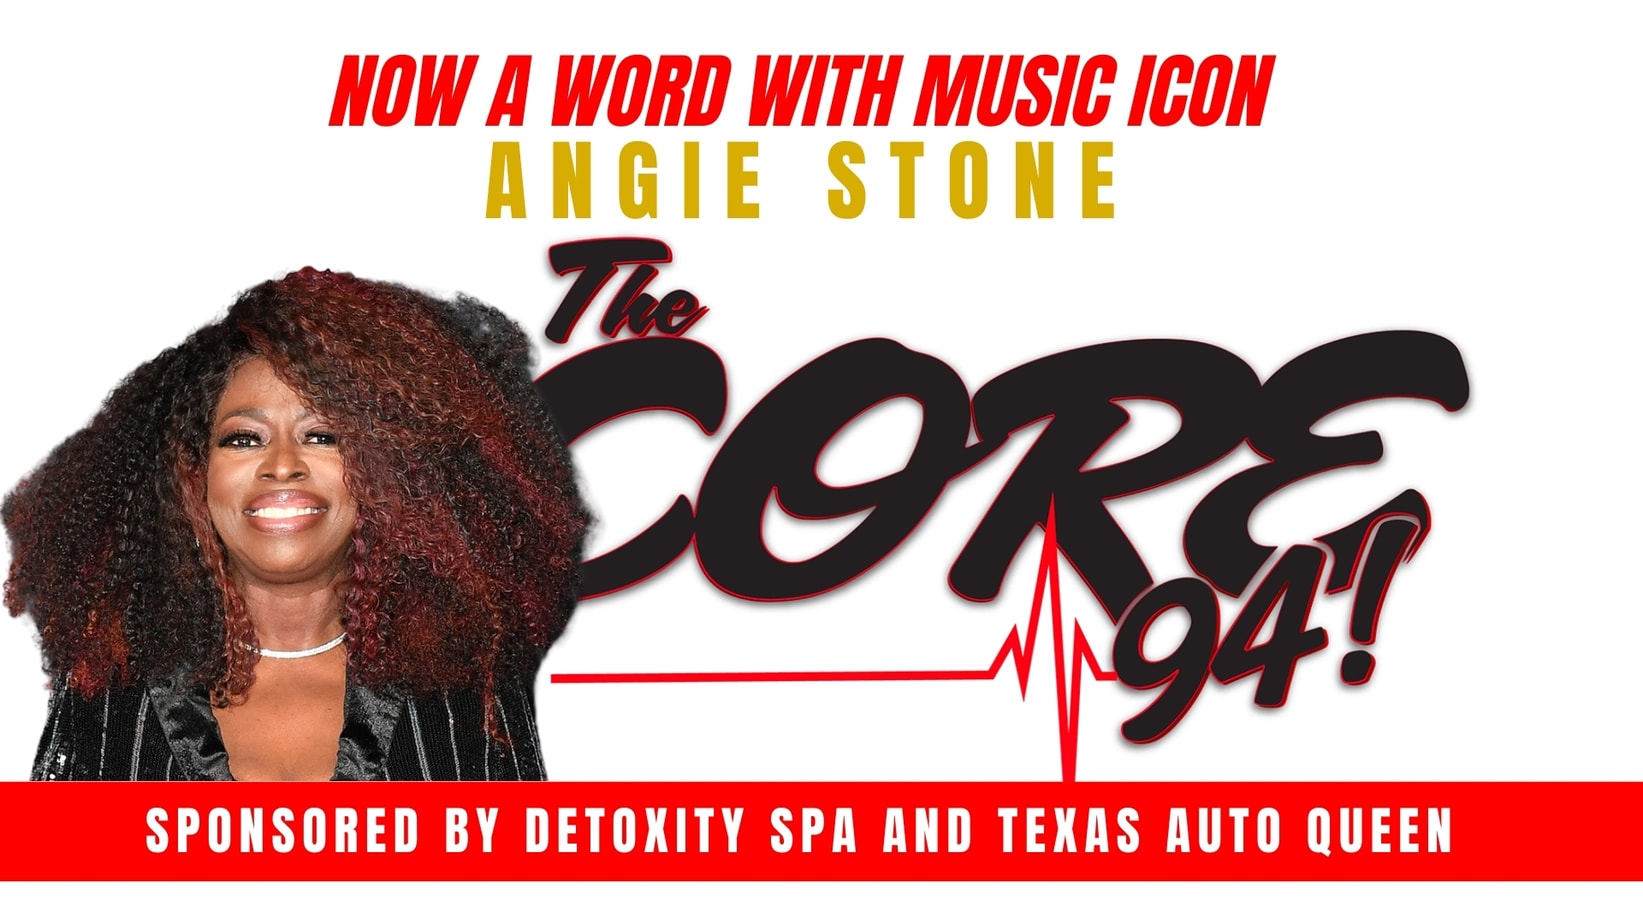 Angie Stone with The Core 94! logo